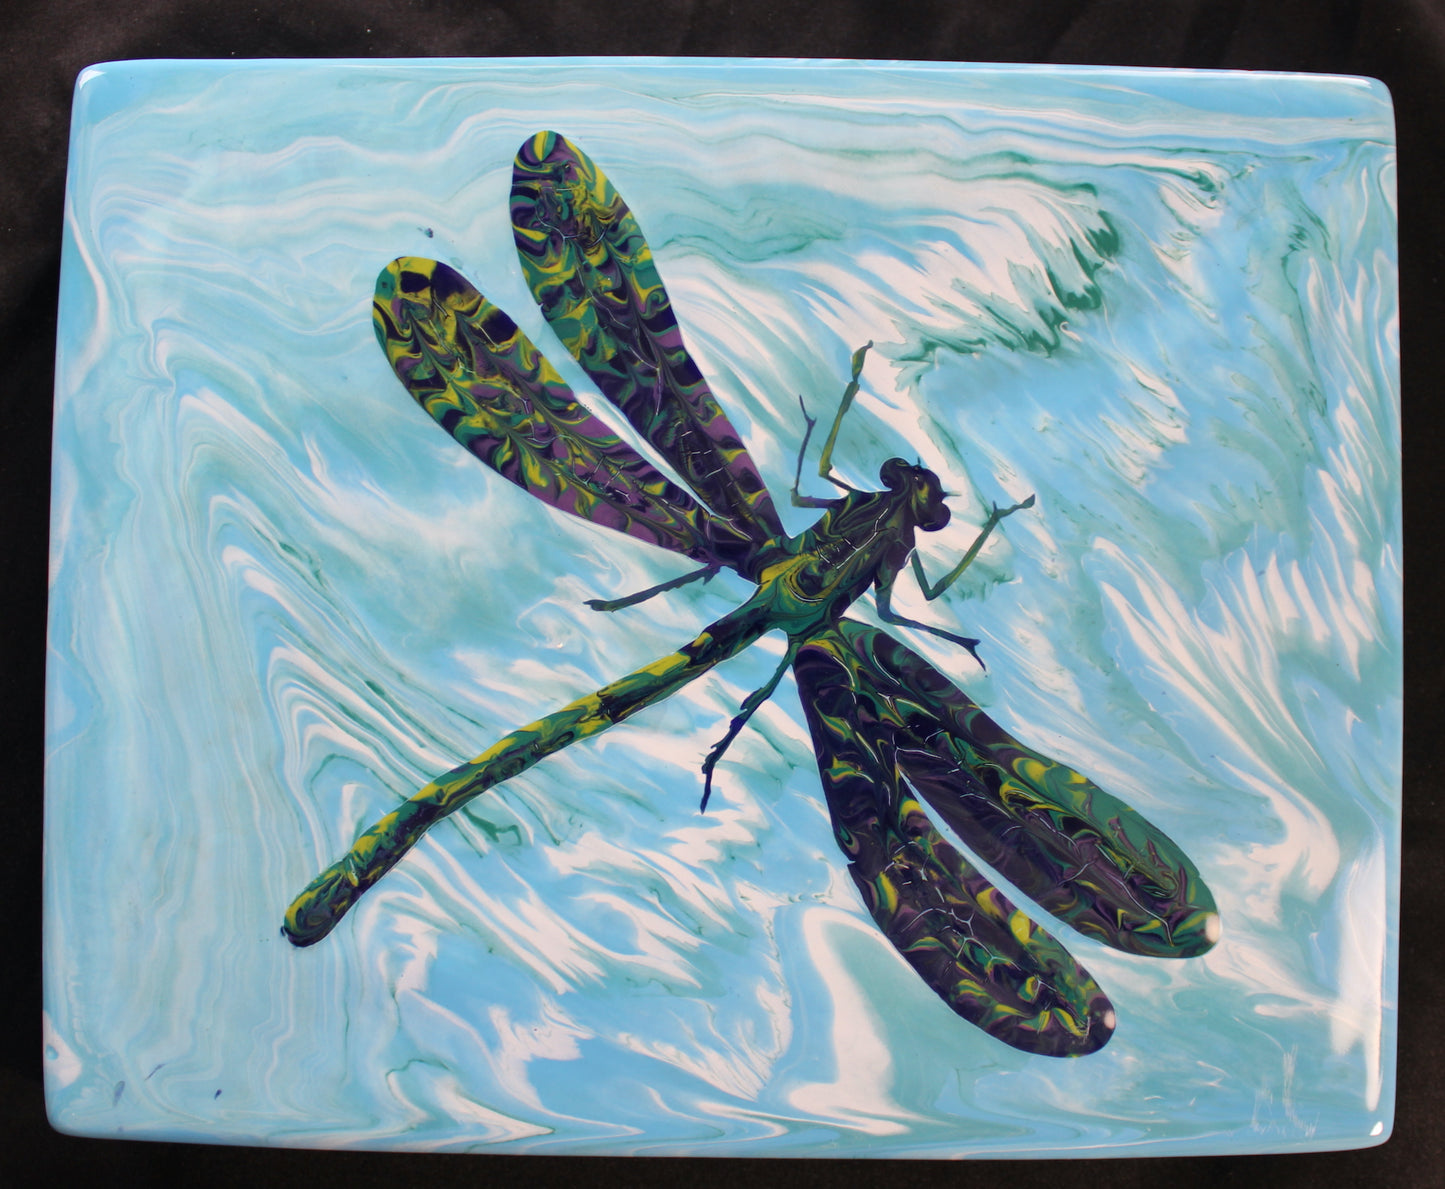 8"x 10" Clay Canvas Glaze Pour Painting - Dragonfly